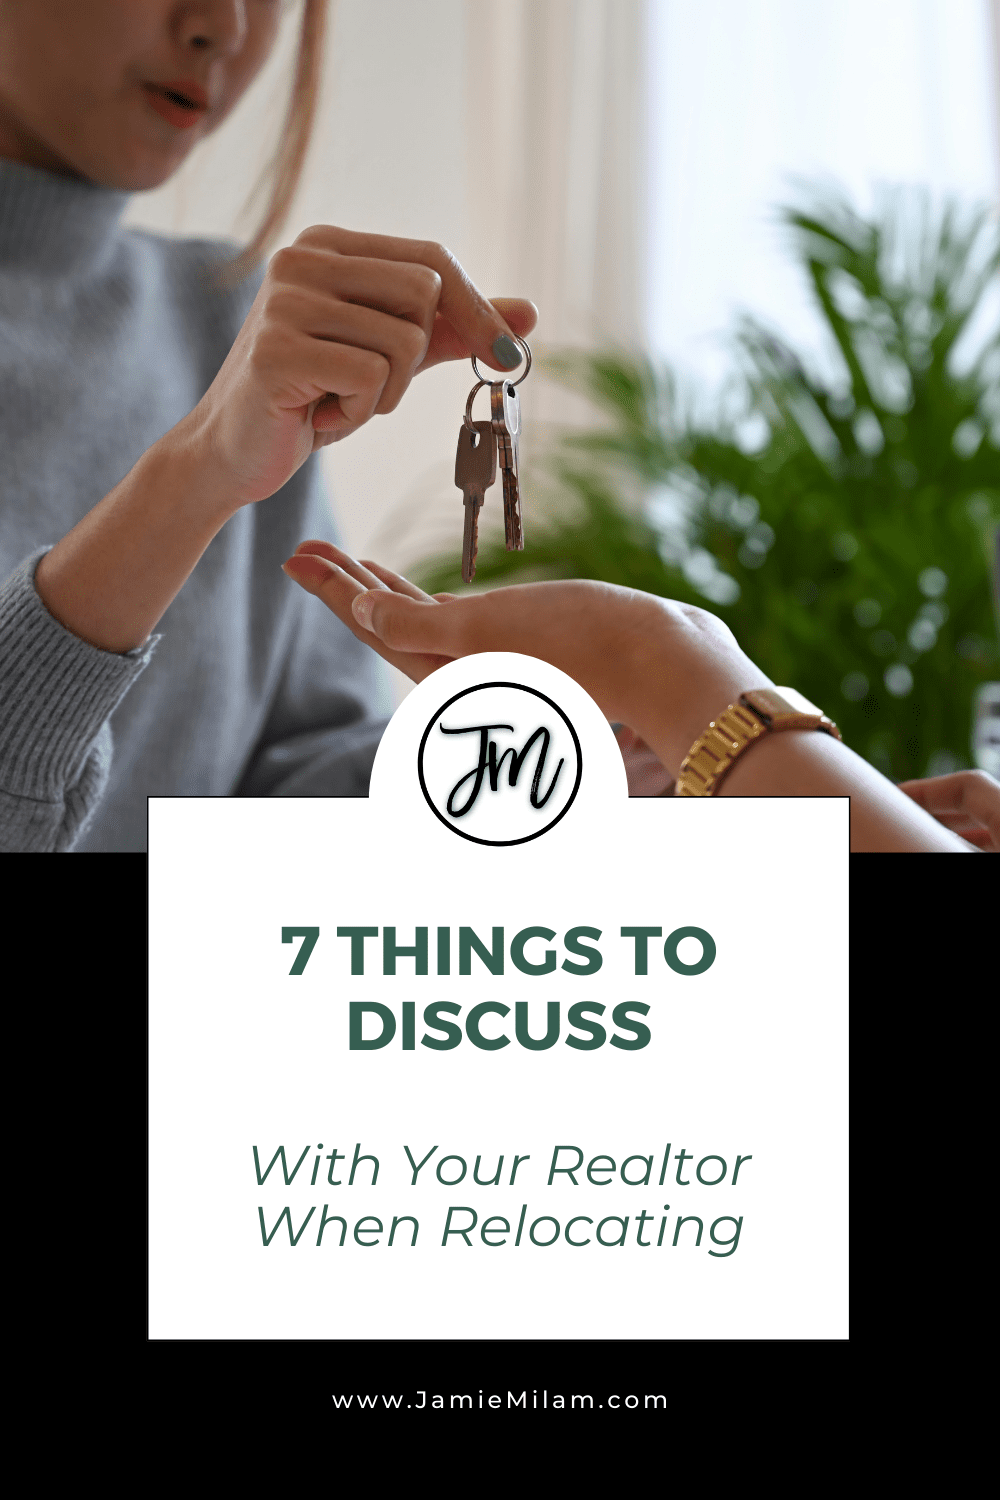 Image of a woman handing over keys and the text "7 Things to Discuss With Your REaltor when Relocating"